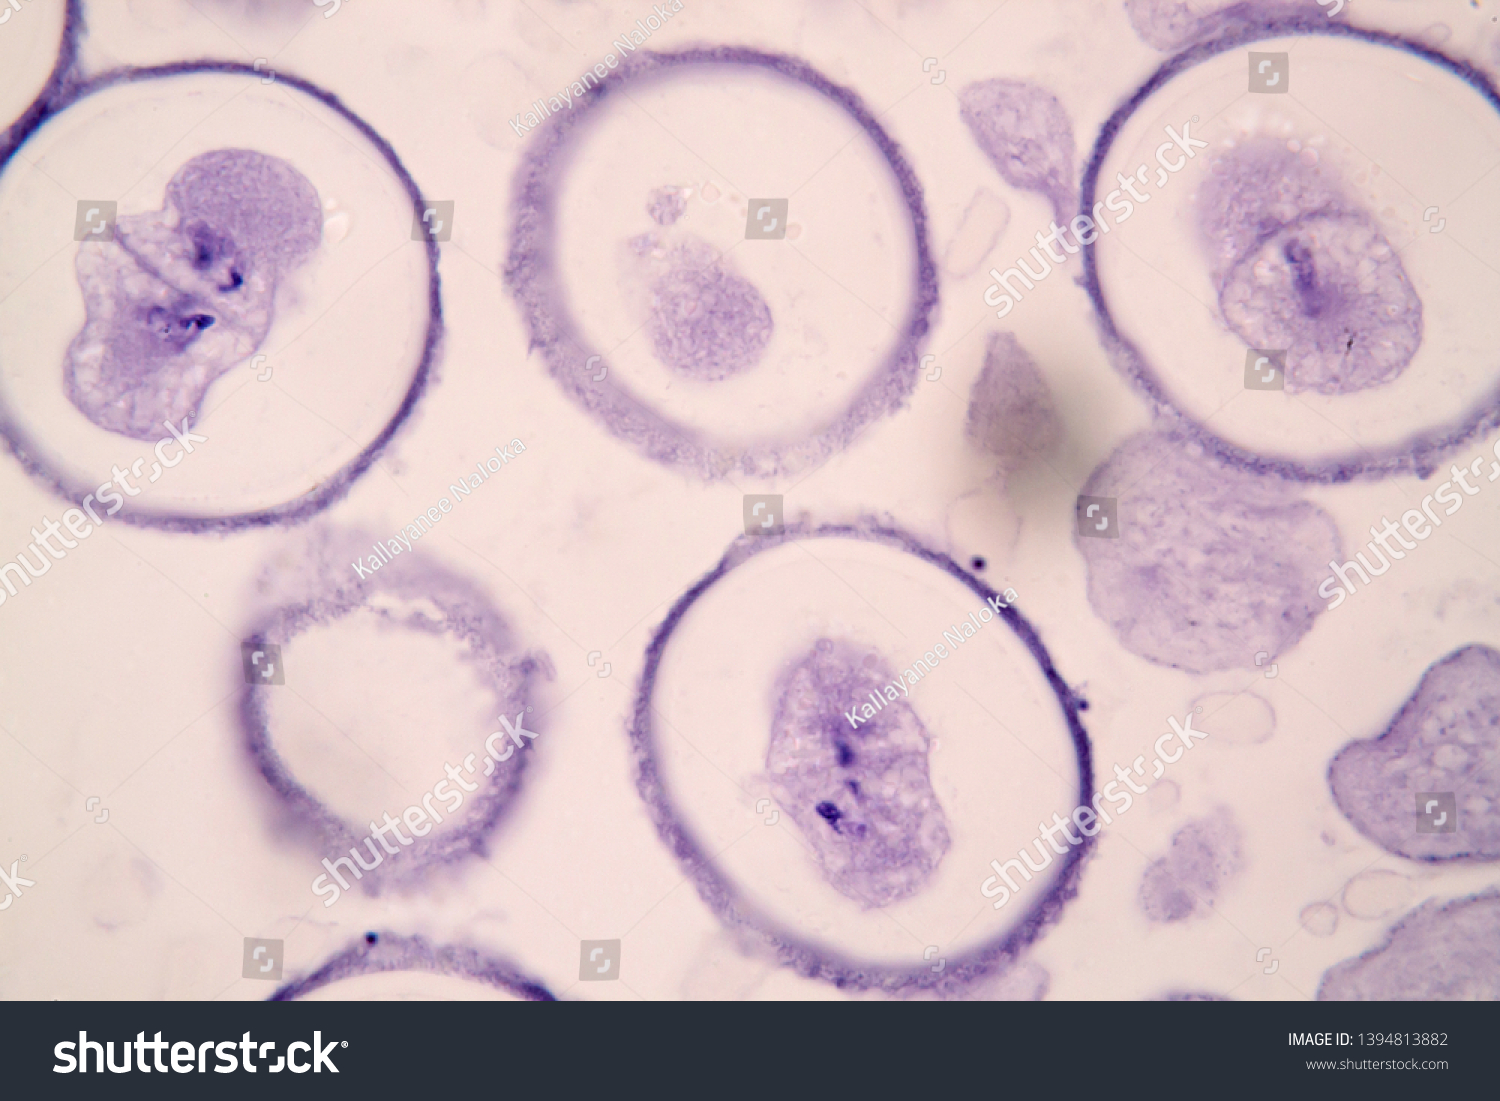 Meiosis Animal Cell Under Microscope Education Stock Photo (Edit Now ...